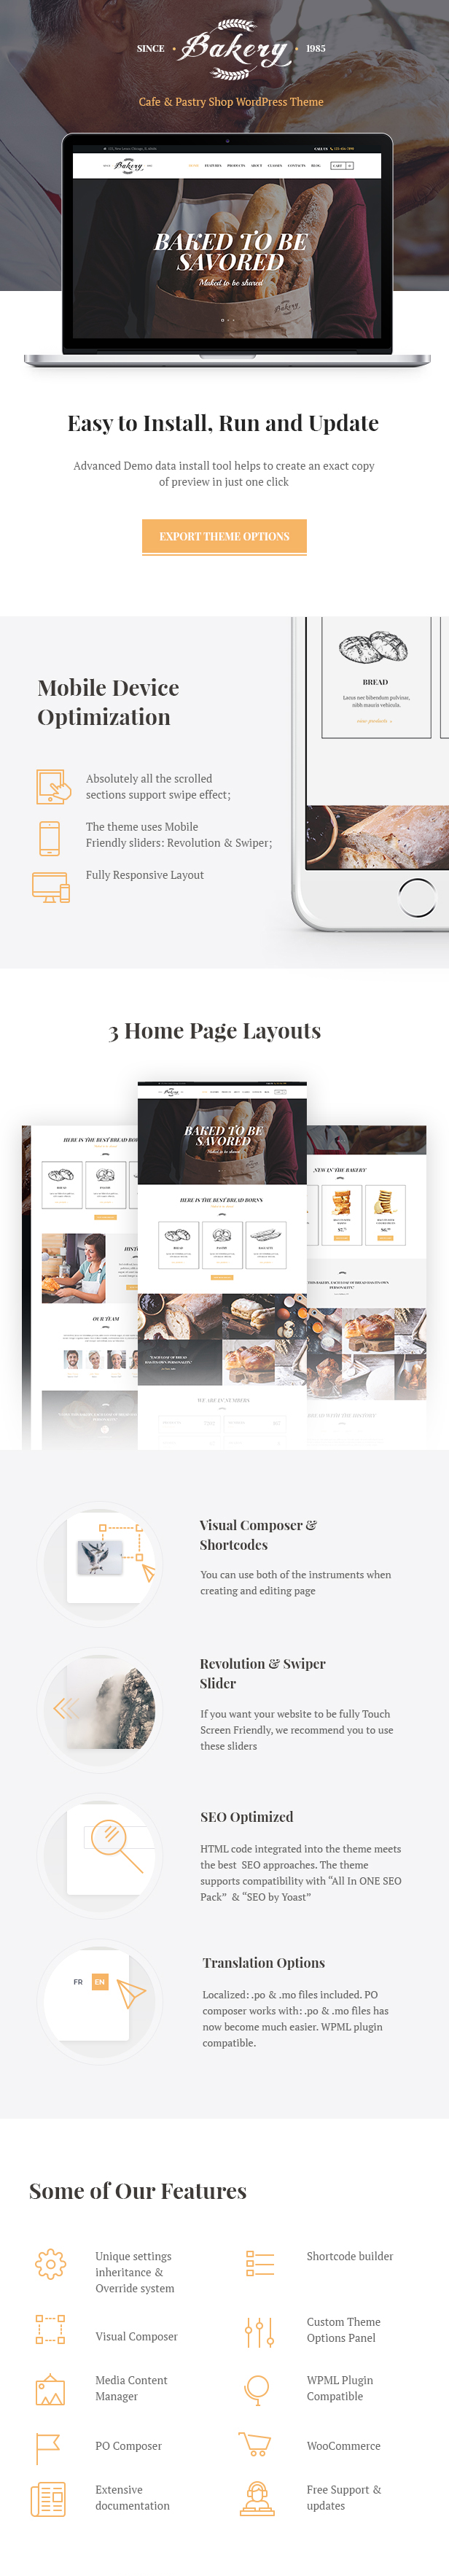 Bakery, Cafe and Pastry Shop WordPress Theme features